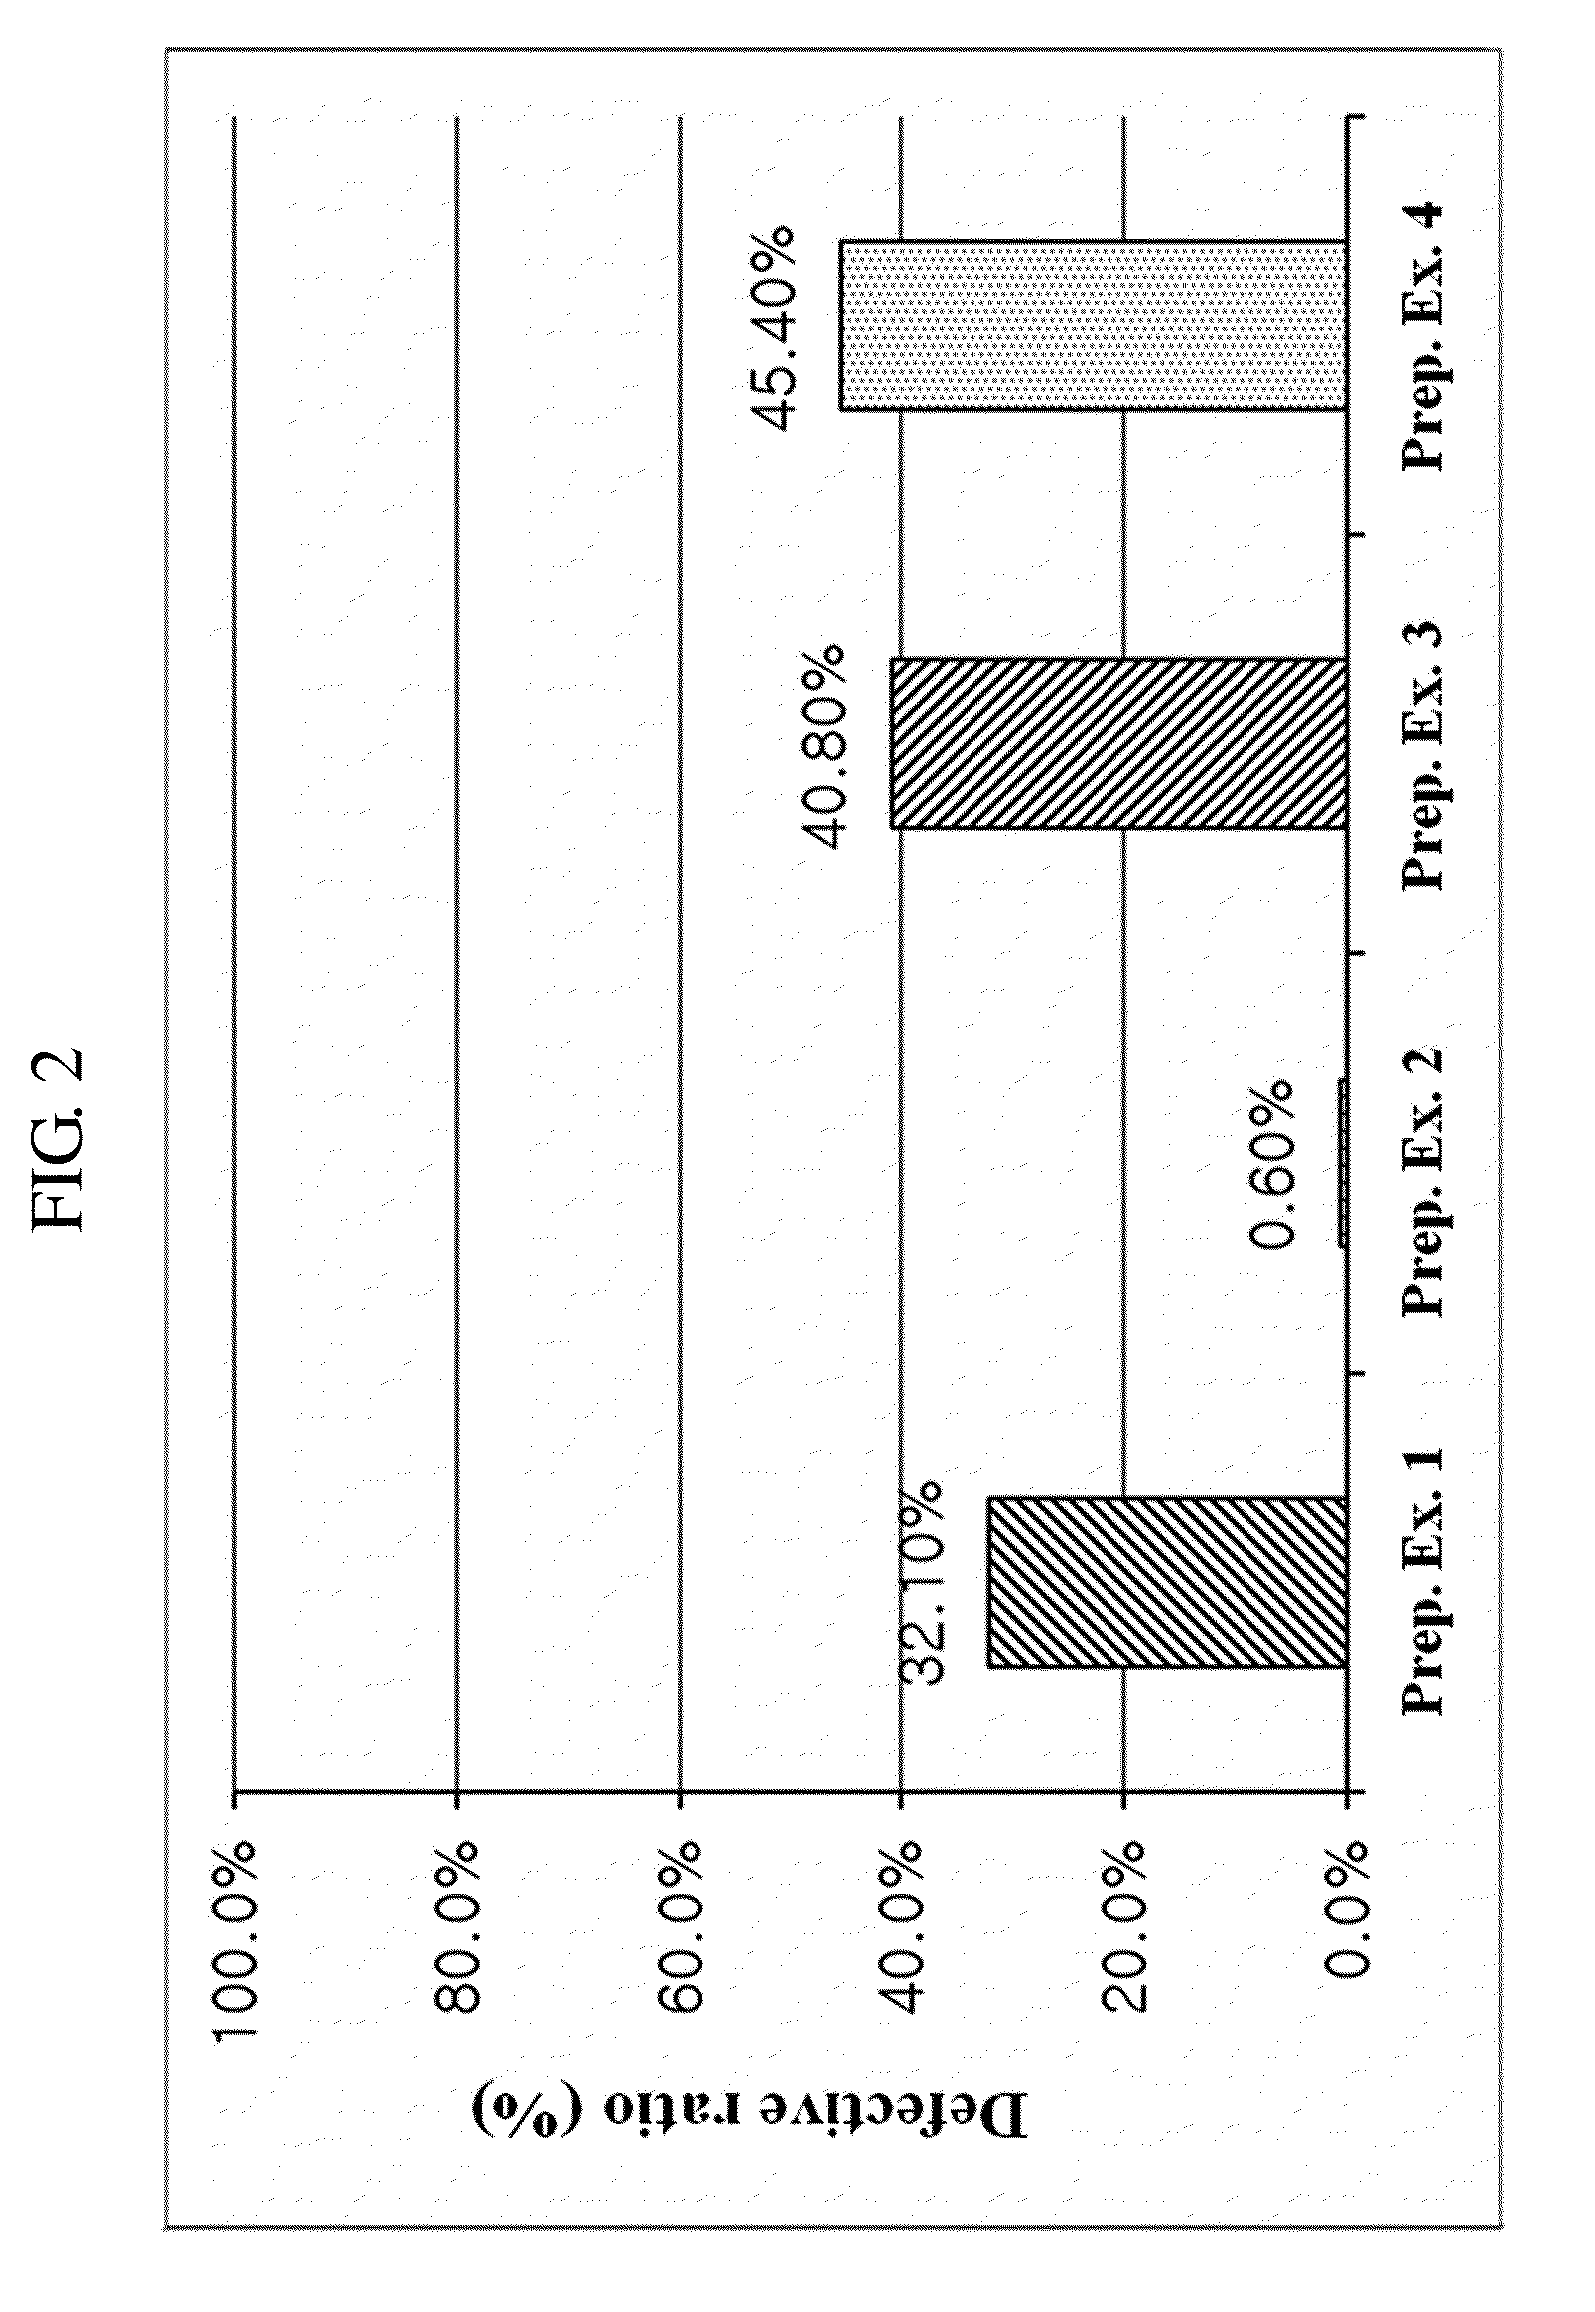 Composite formulation comprising a film coating layer containing rosuvastatin or a pharmaceutically acceptable salt thereof